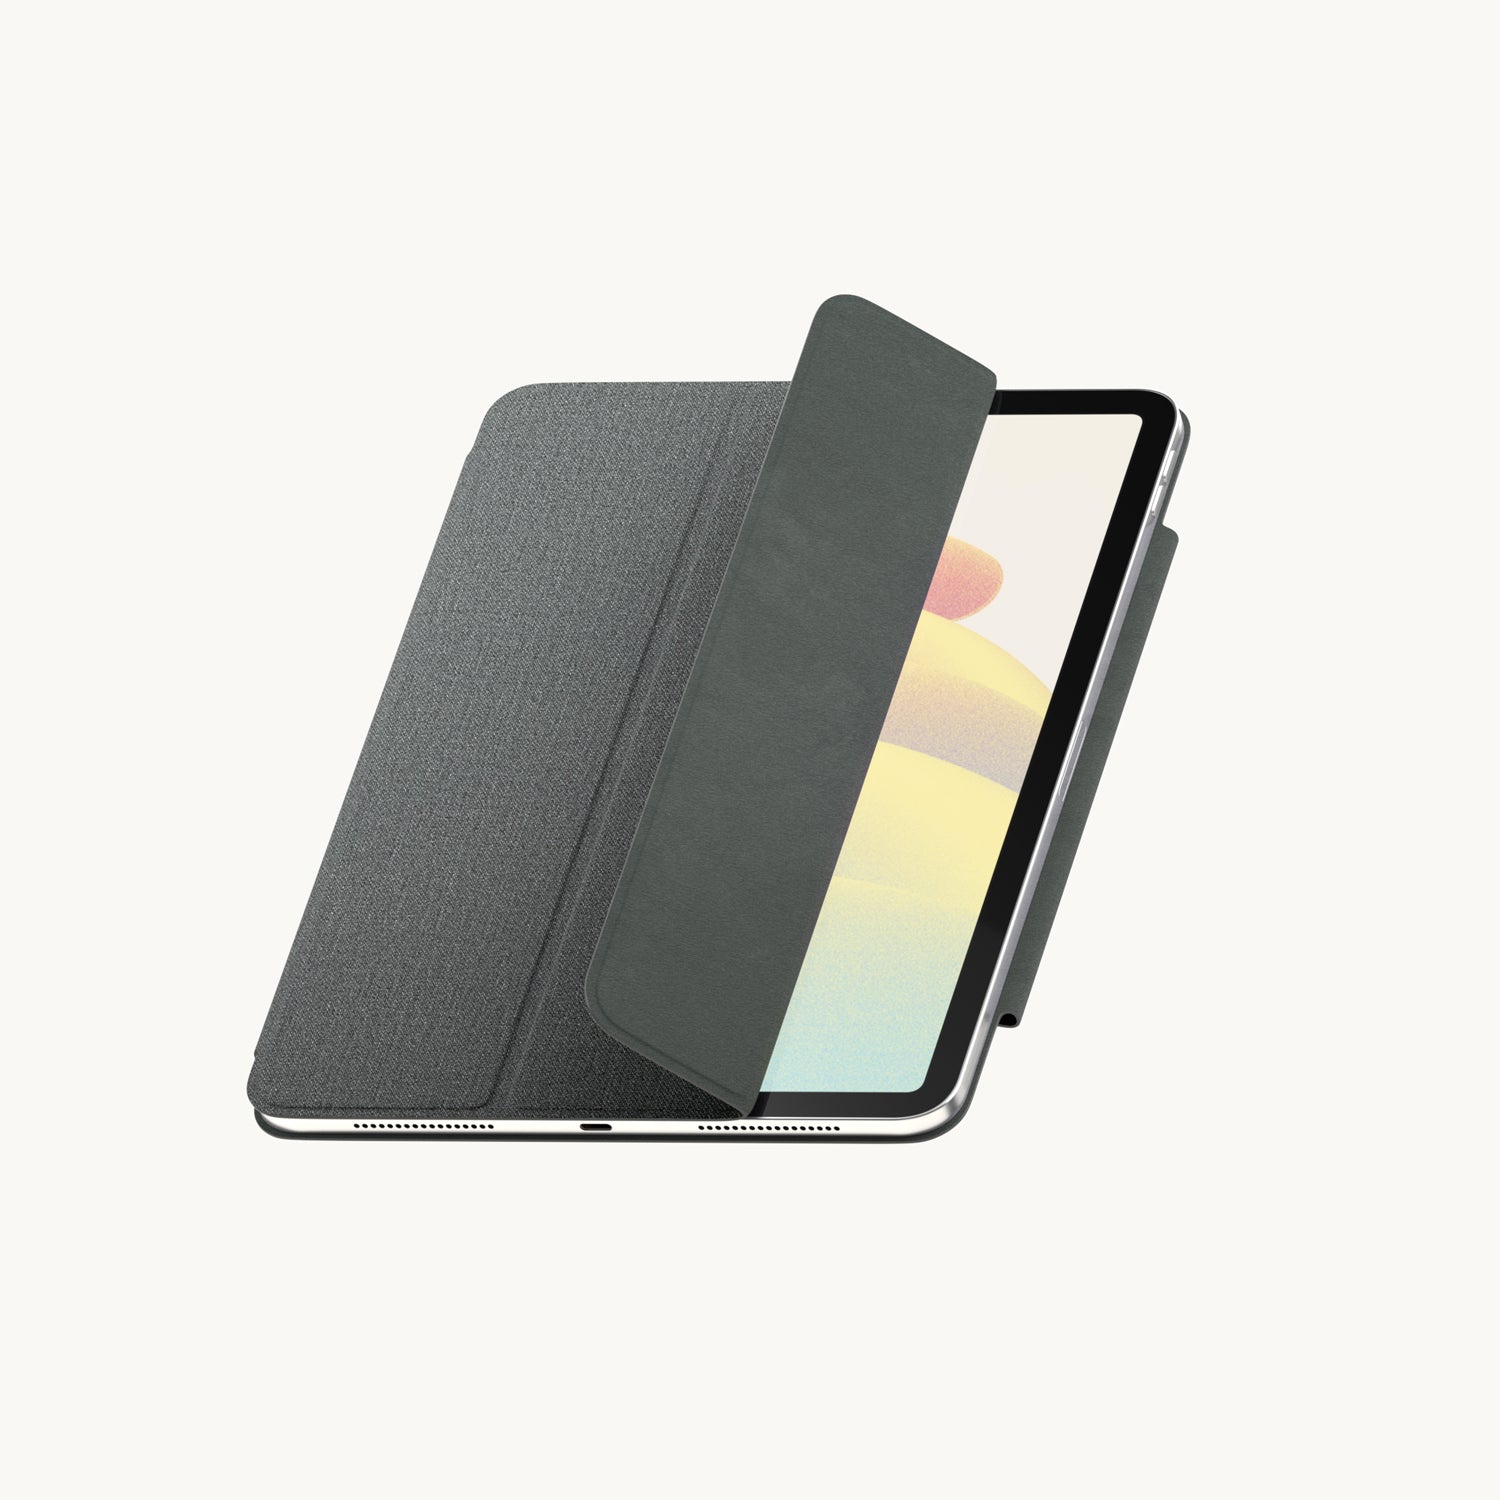 iPad Pro (11-inch) 3rd, 2nd, 1st gen. Cases & Accessories